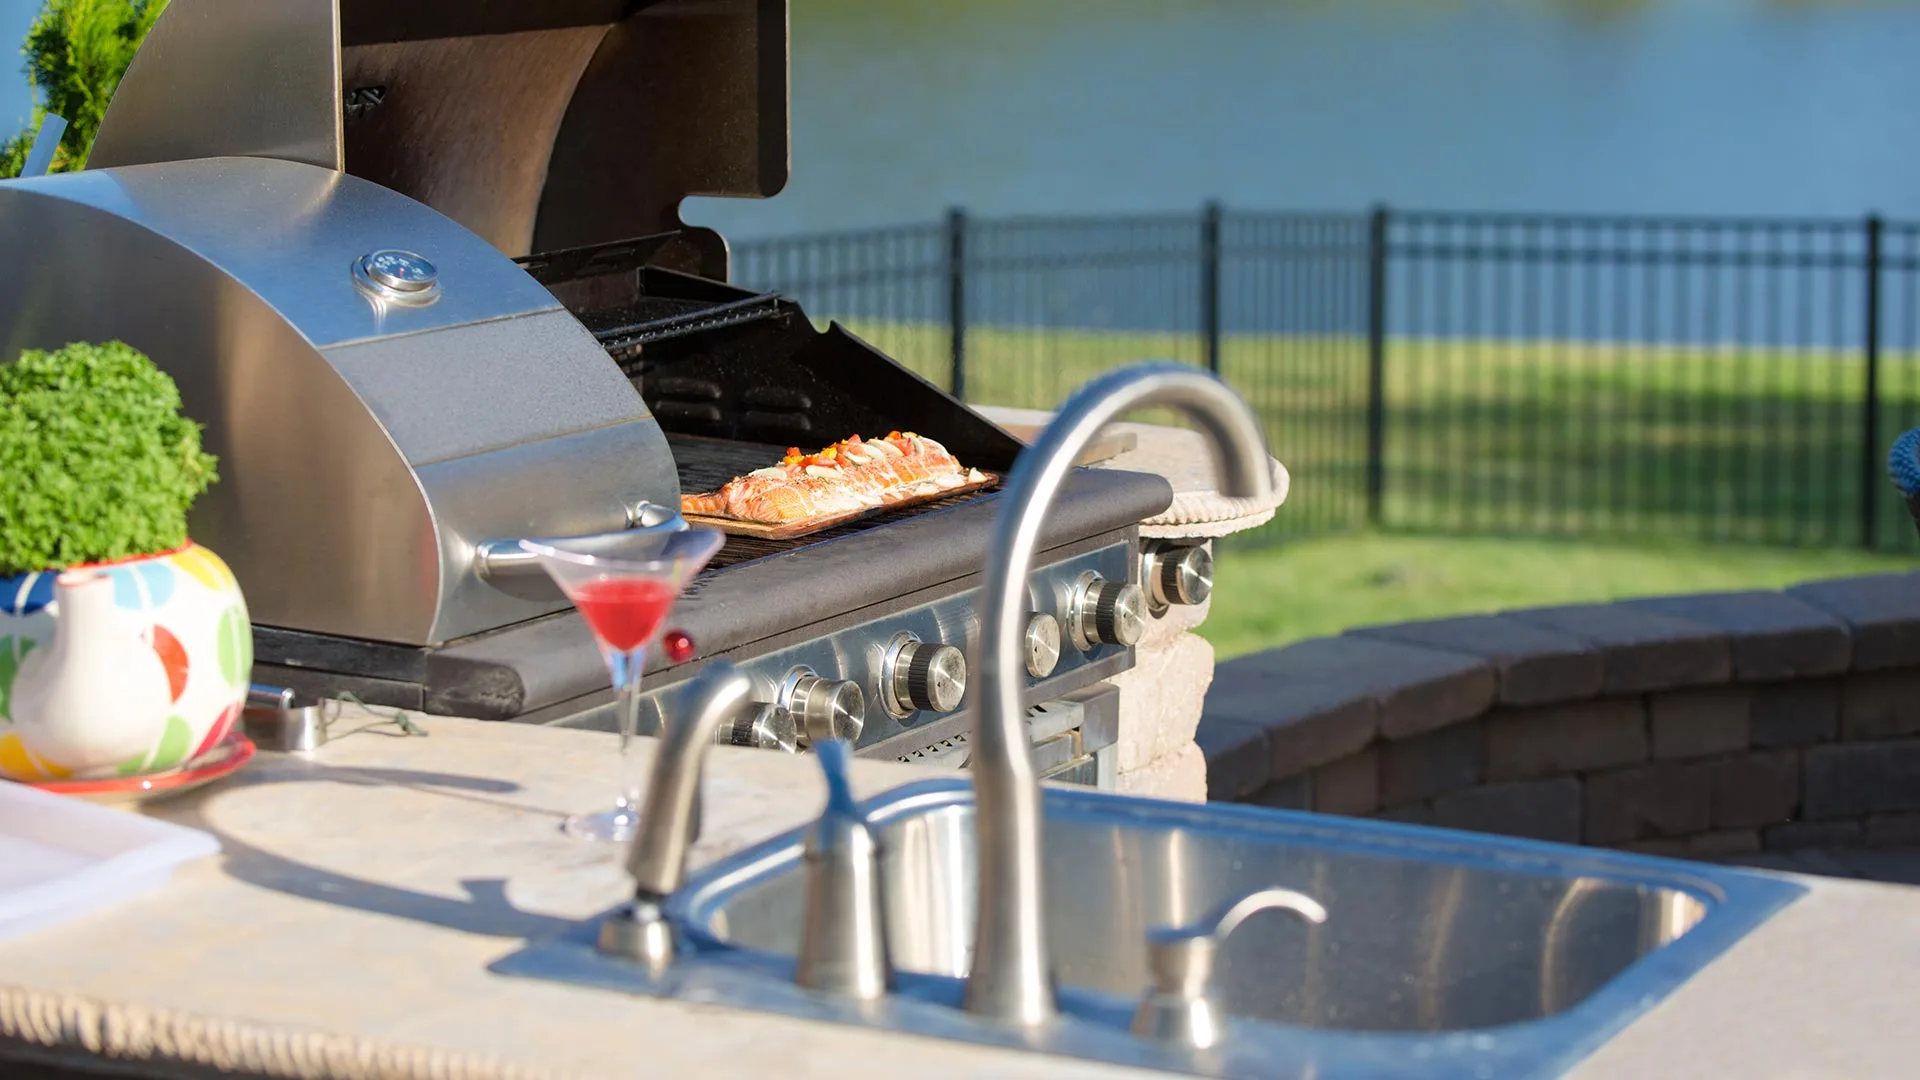 Outdoor kitchen sink and grill on stone counter in Grand Rapids, MI.